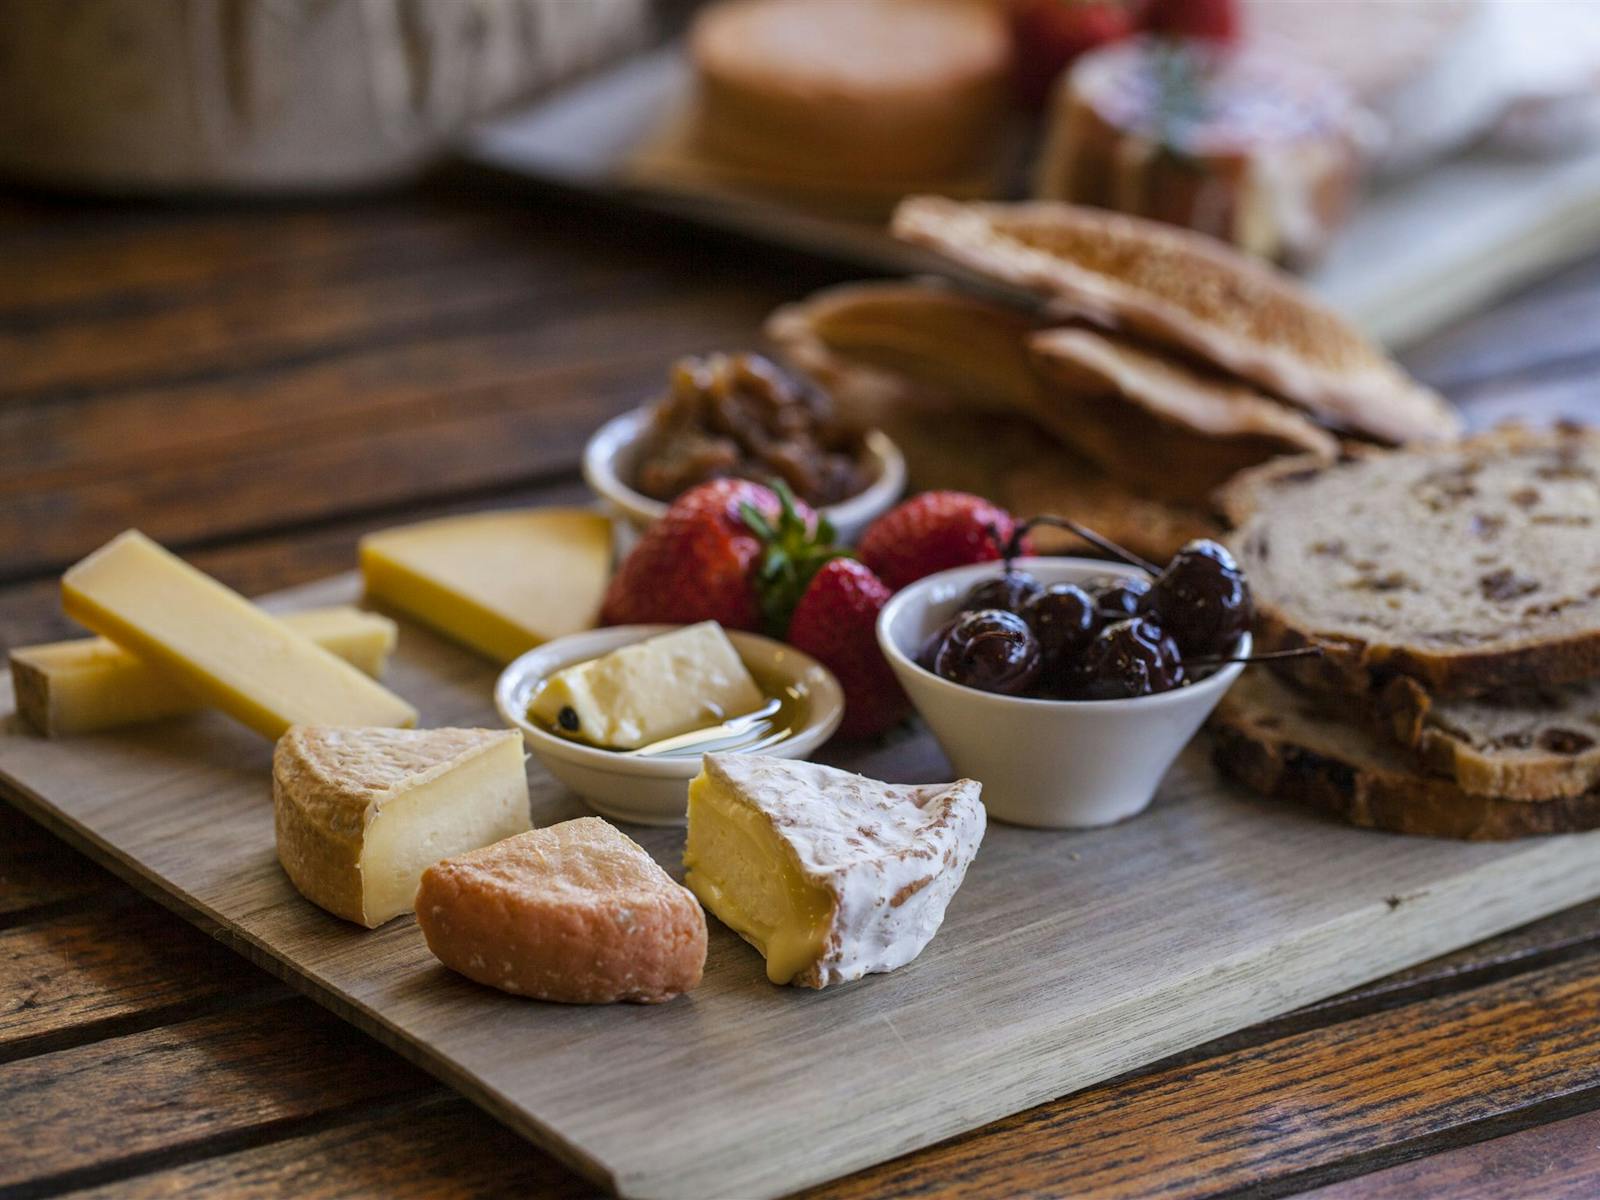 Visit Bruny Island Cheese Co with Bruny Island Traveller